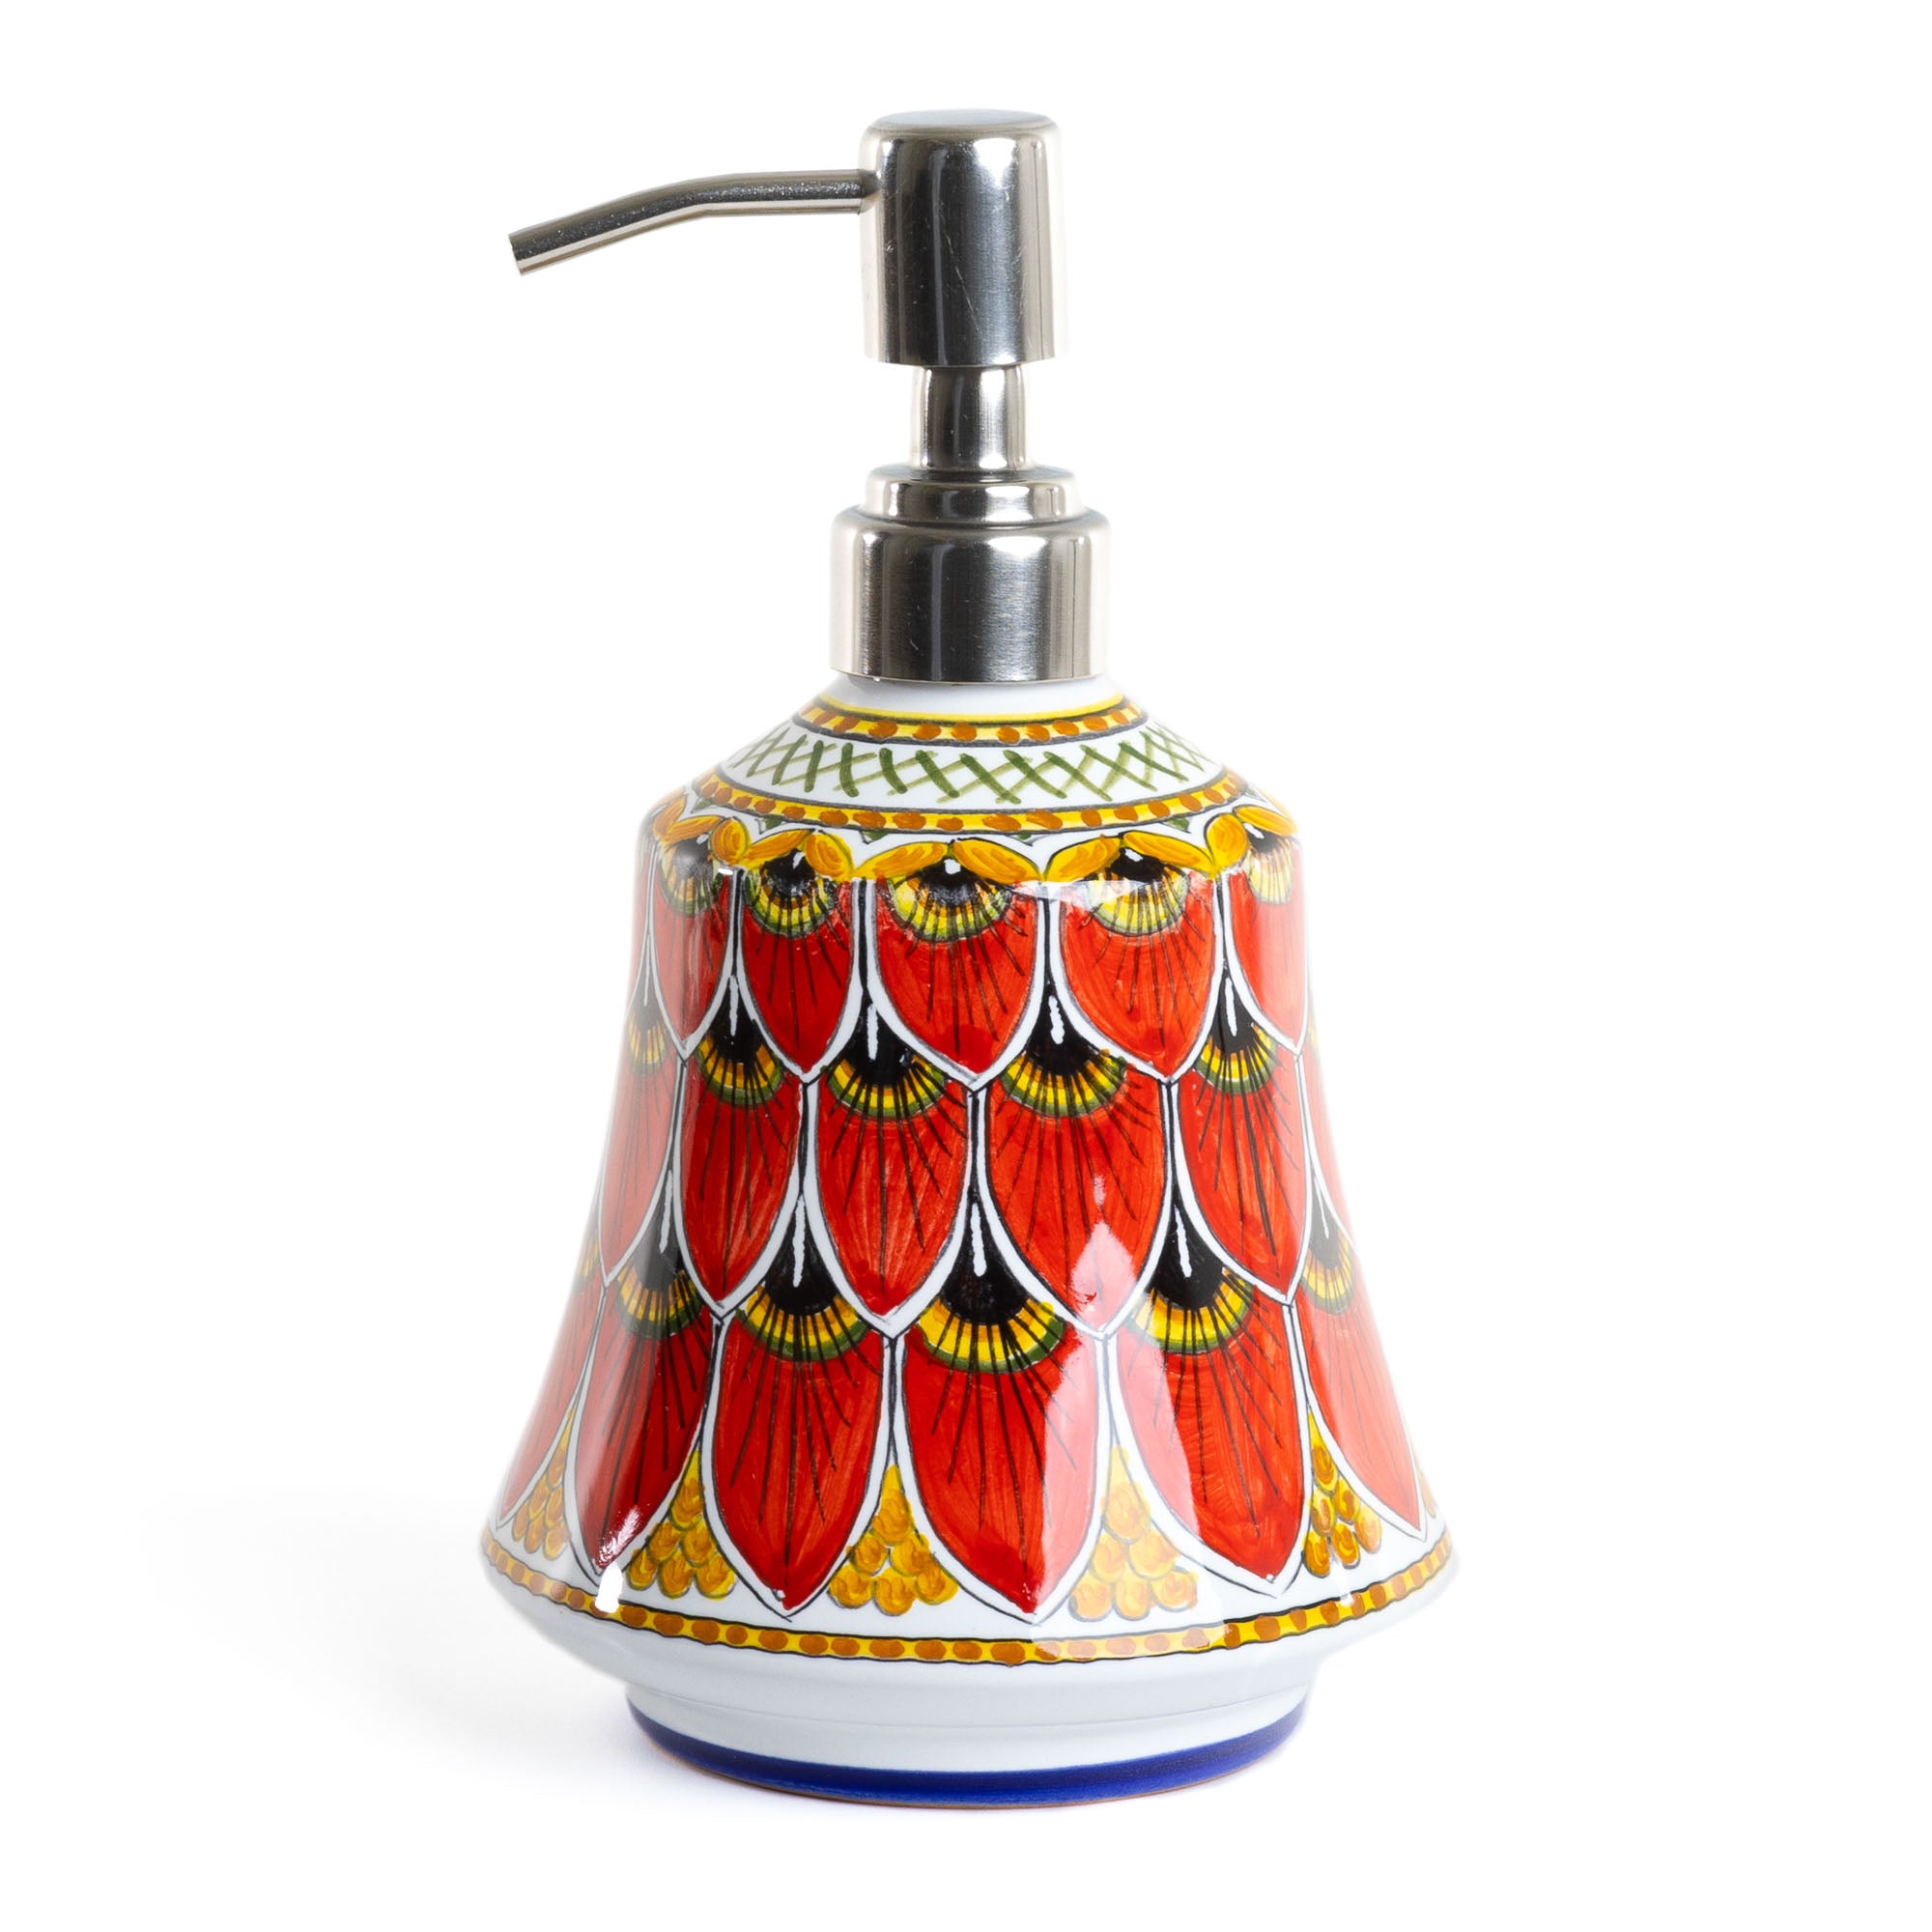 Red Peacock - Soap Dispenser, ceramics, pottery, italian design, majolica, handmade, handcrafted, handpainted, home decor, kitchen art, home goods, deruta, majolica, Artisan, treasures, traditional art, modern art, gift ideas, style, SF, shop small business, artists, shop online, landmark store, legacy, one of a kind, limited edition, gift guide, gift shop, retail shop, decorations, shopping, italy, home staging, home decorating, home interiors